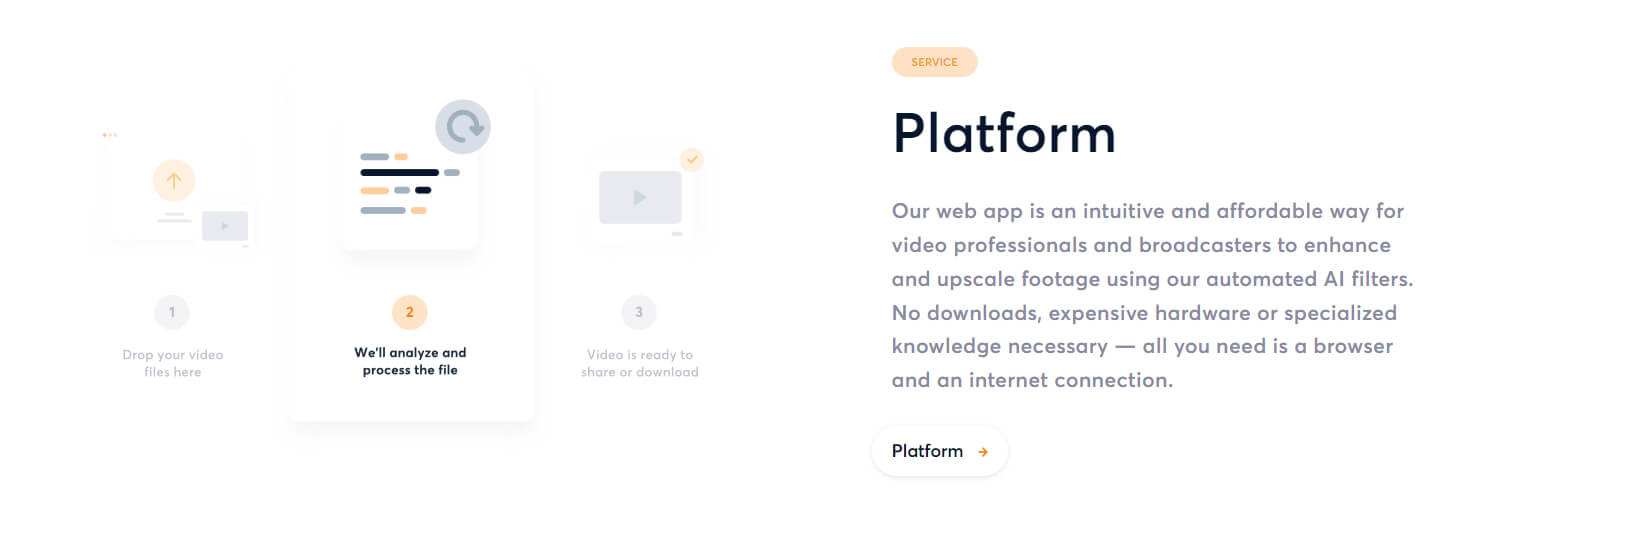 The homepage of Platform, a company's website. A sleek and modern design with easy navigation.